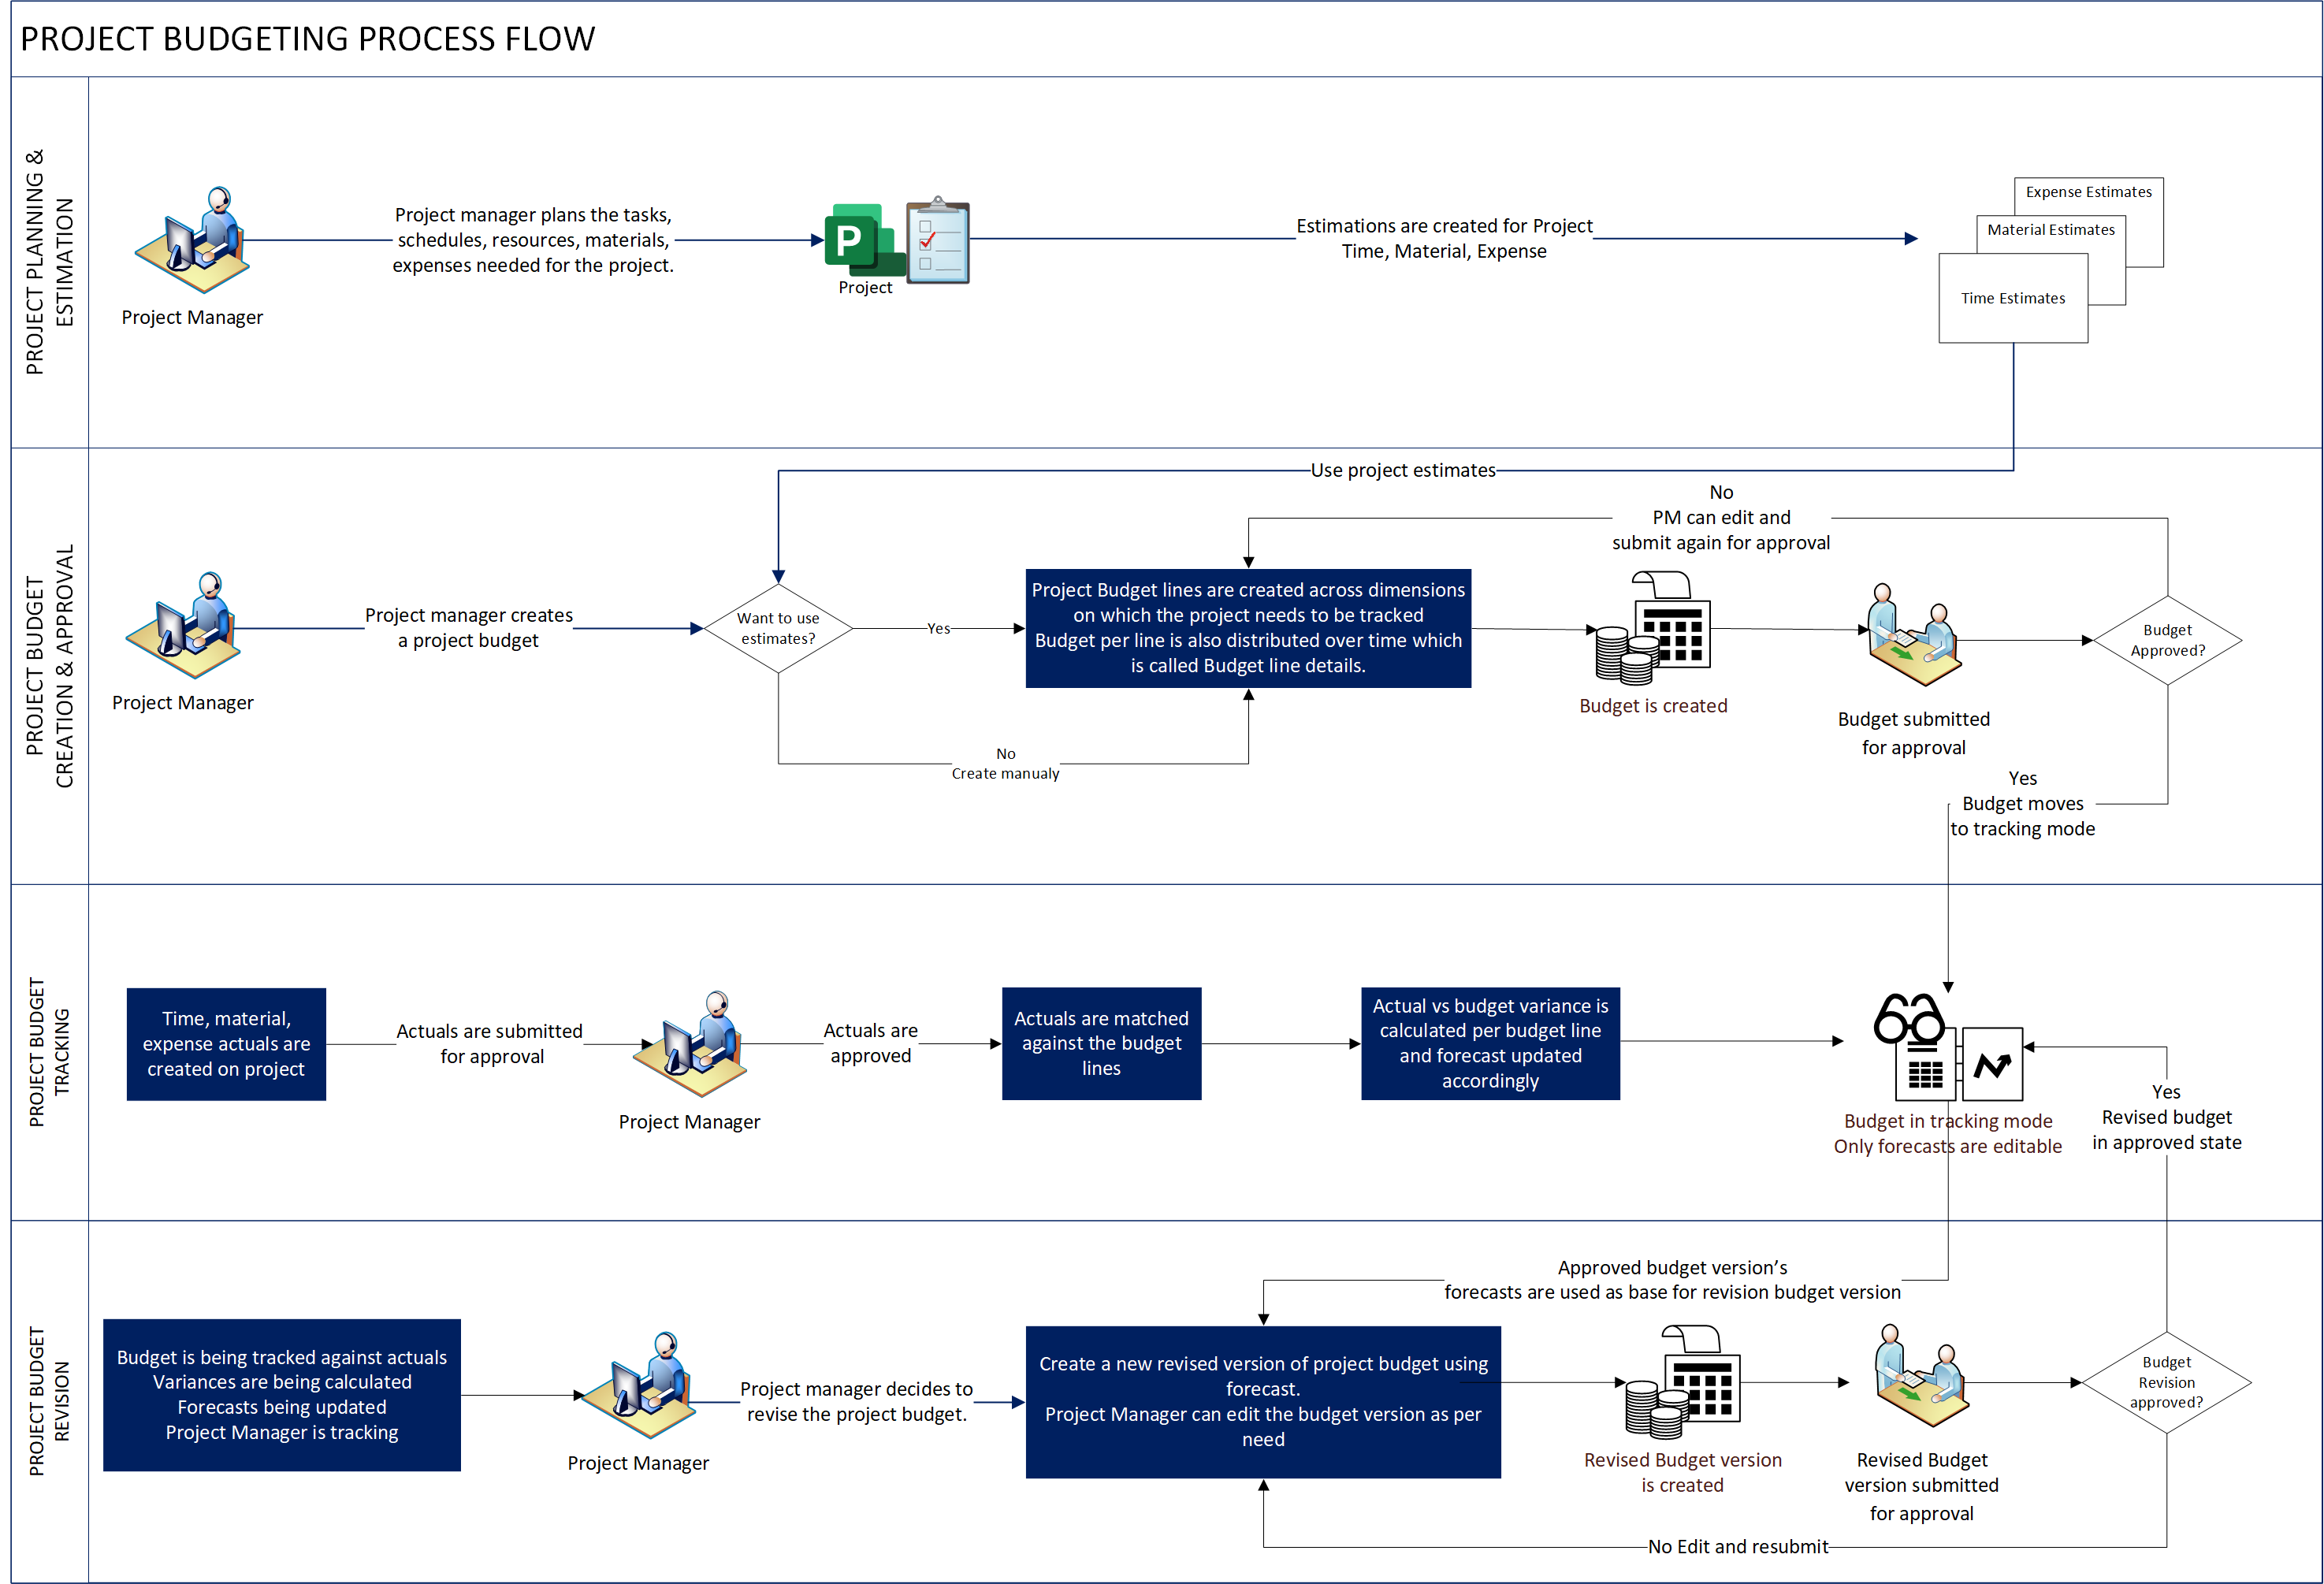 Business process flow for project budget management in Project Operations.